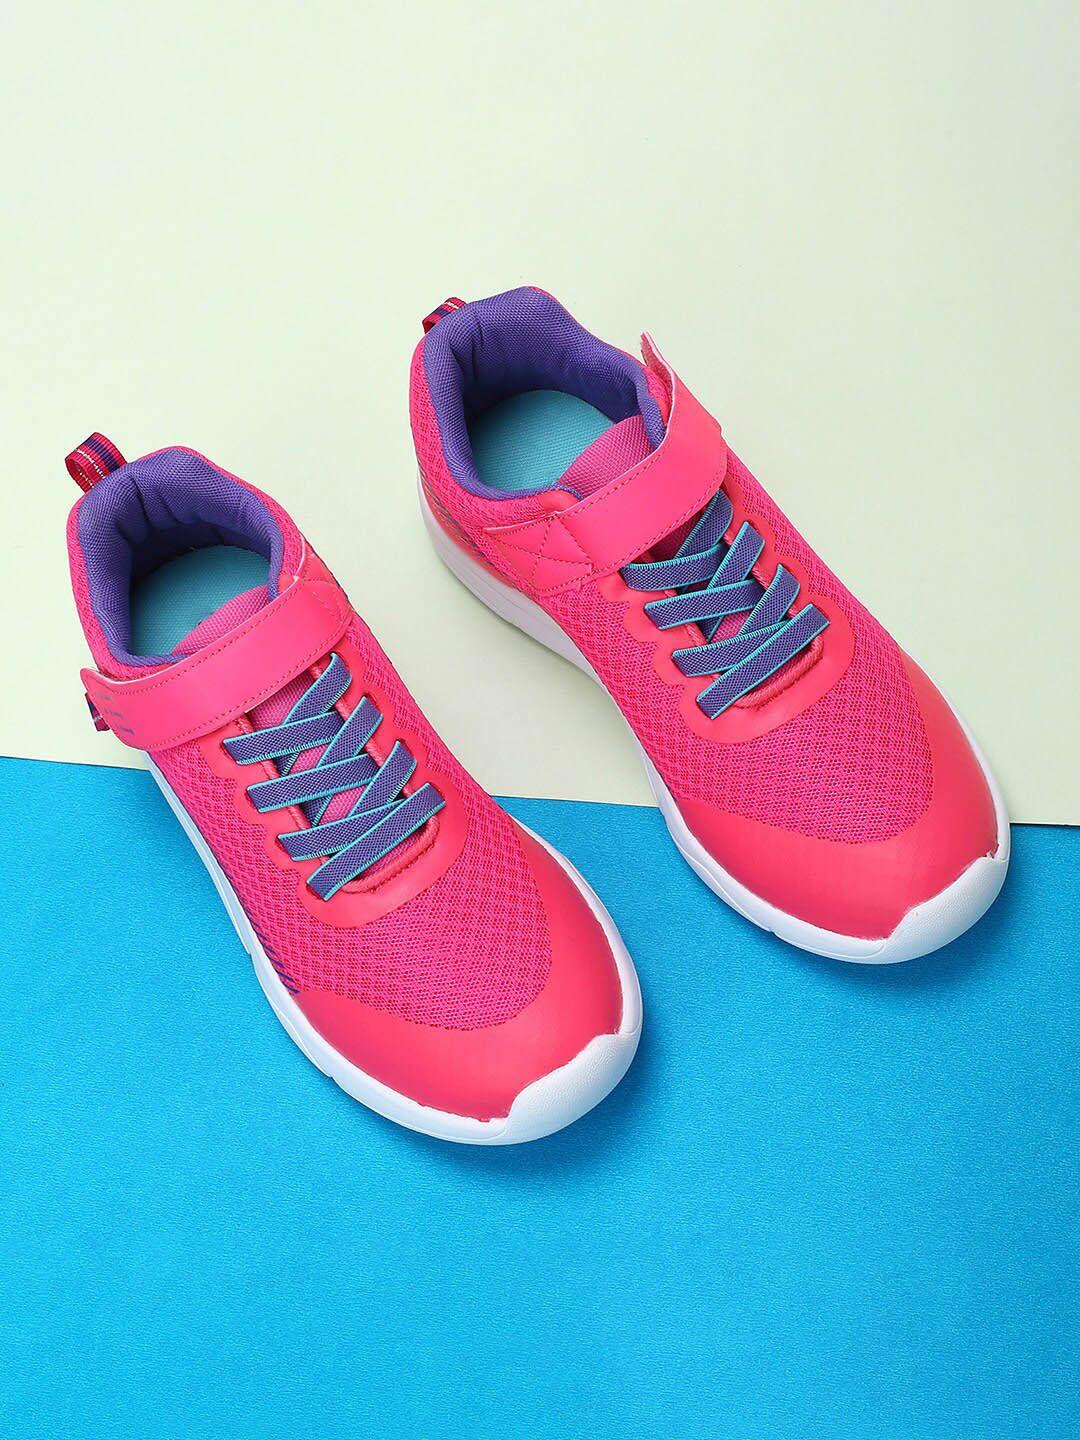 max girls pink woven design pu sneakers